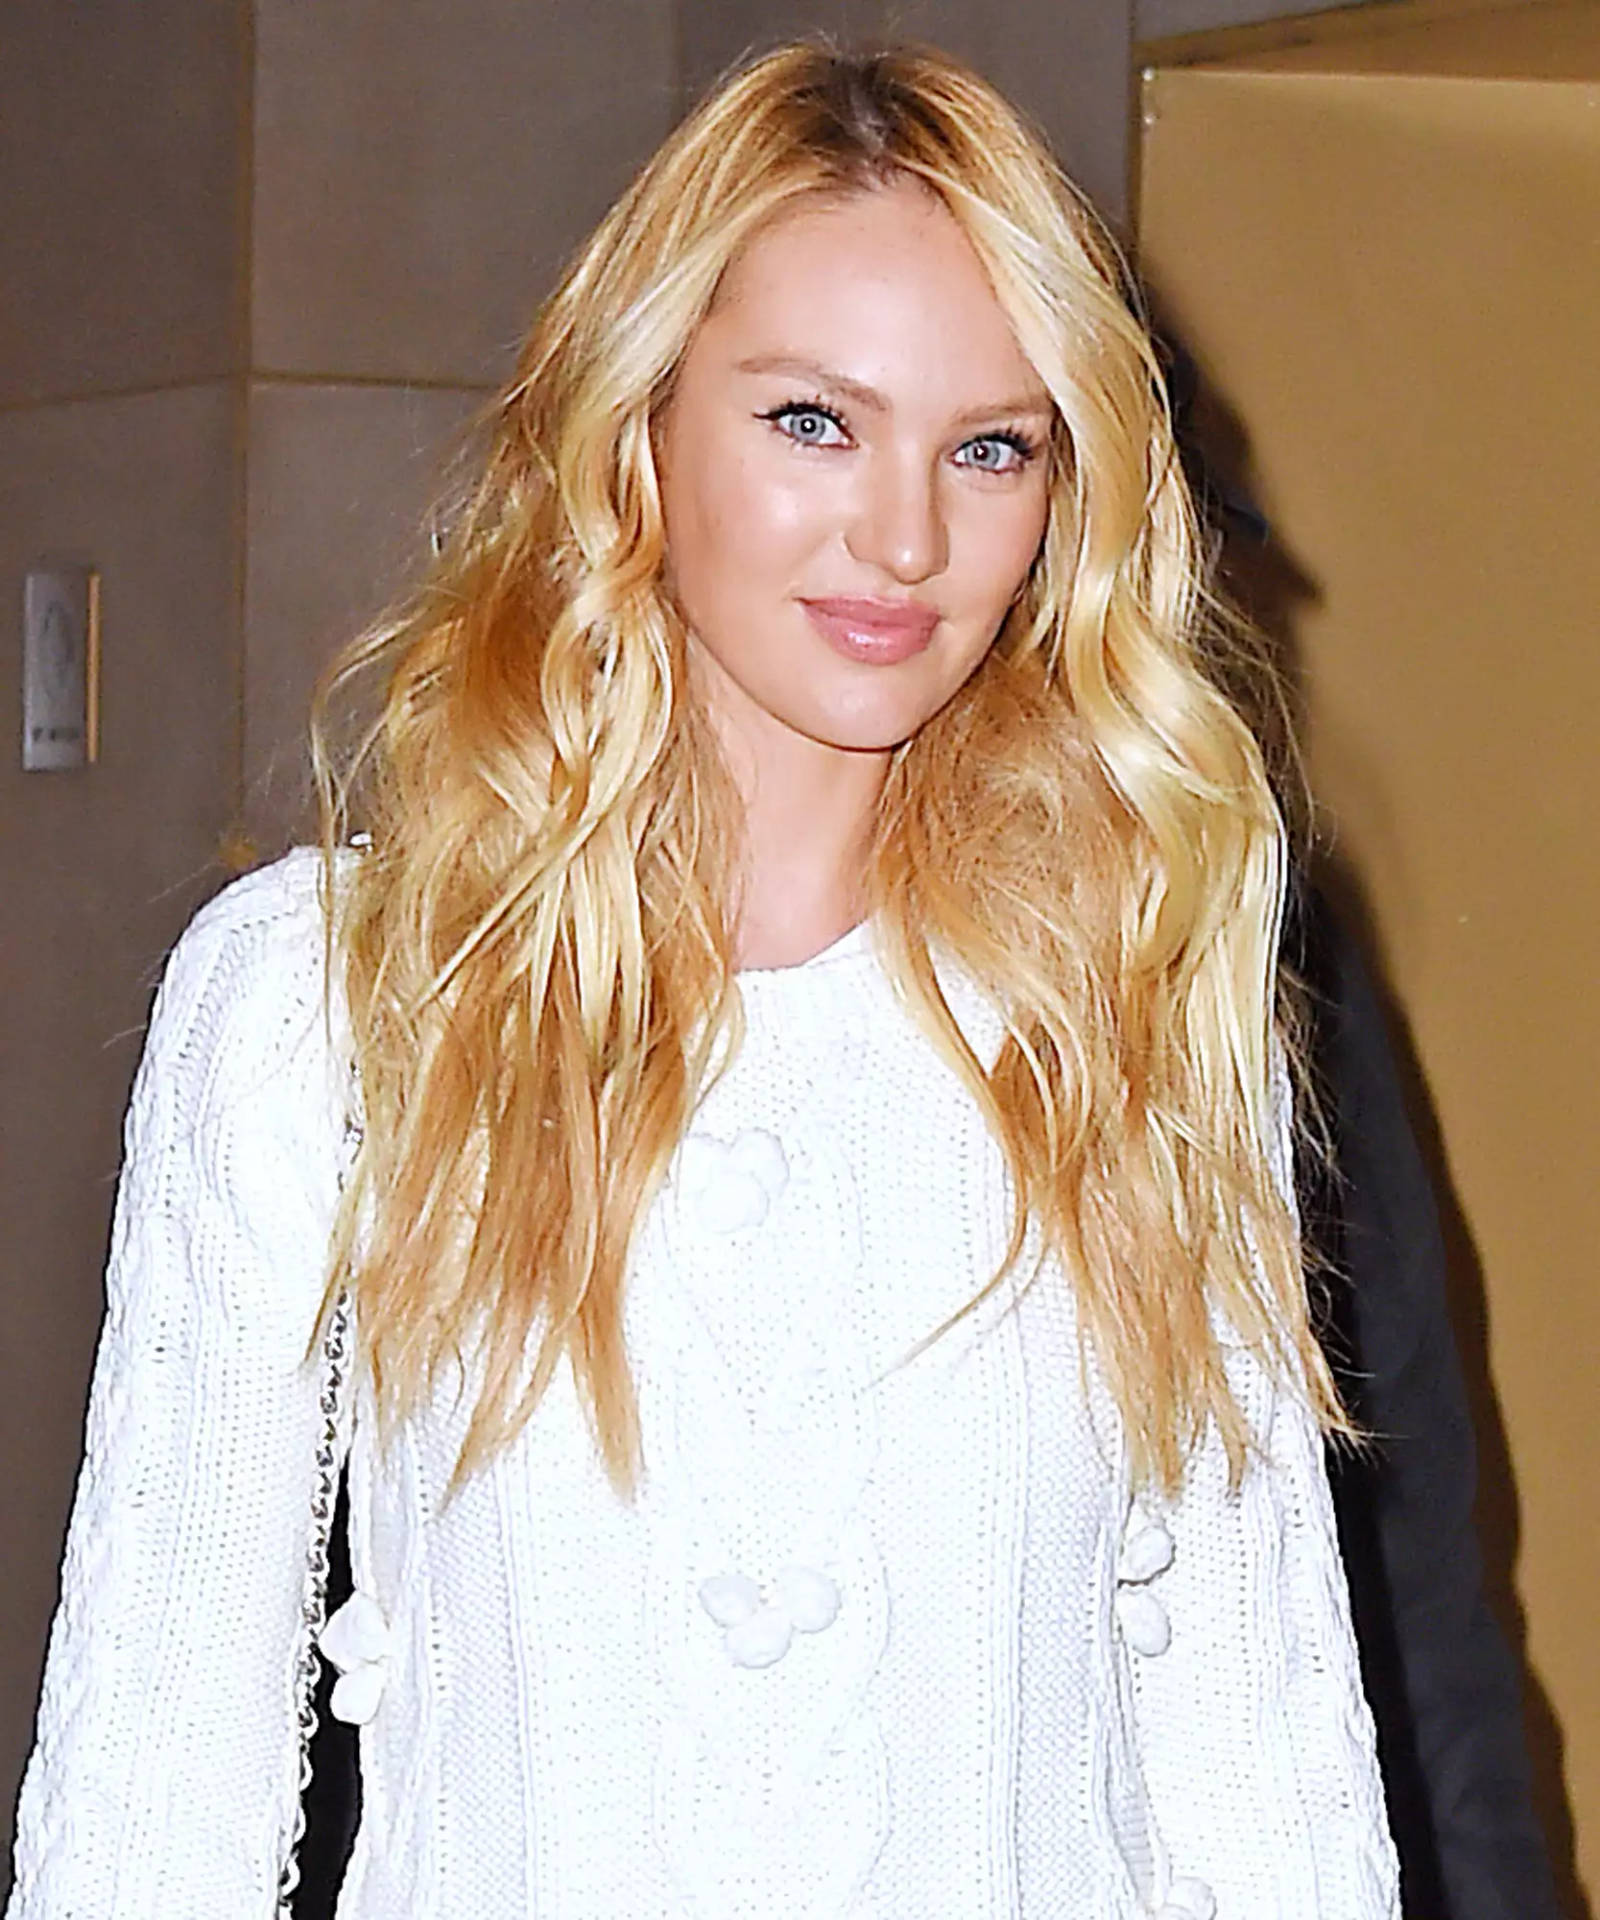 Candice Swanepoel Showcasing Her Natural Beauty In A Designer Outfit. Wallpaper